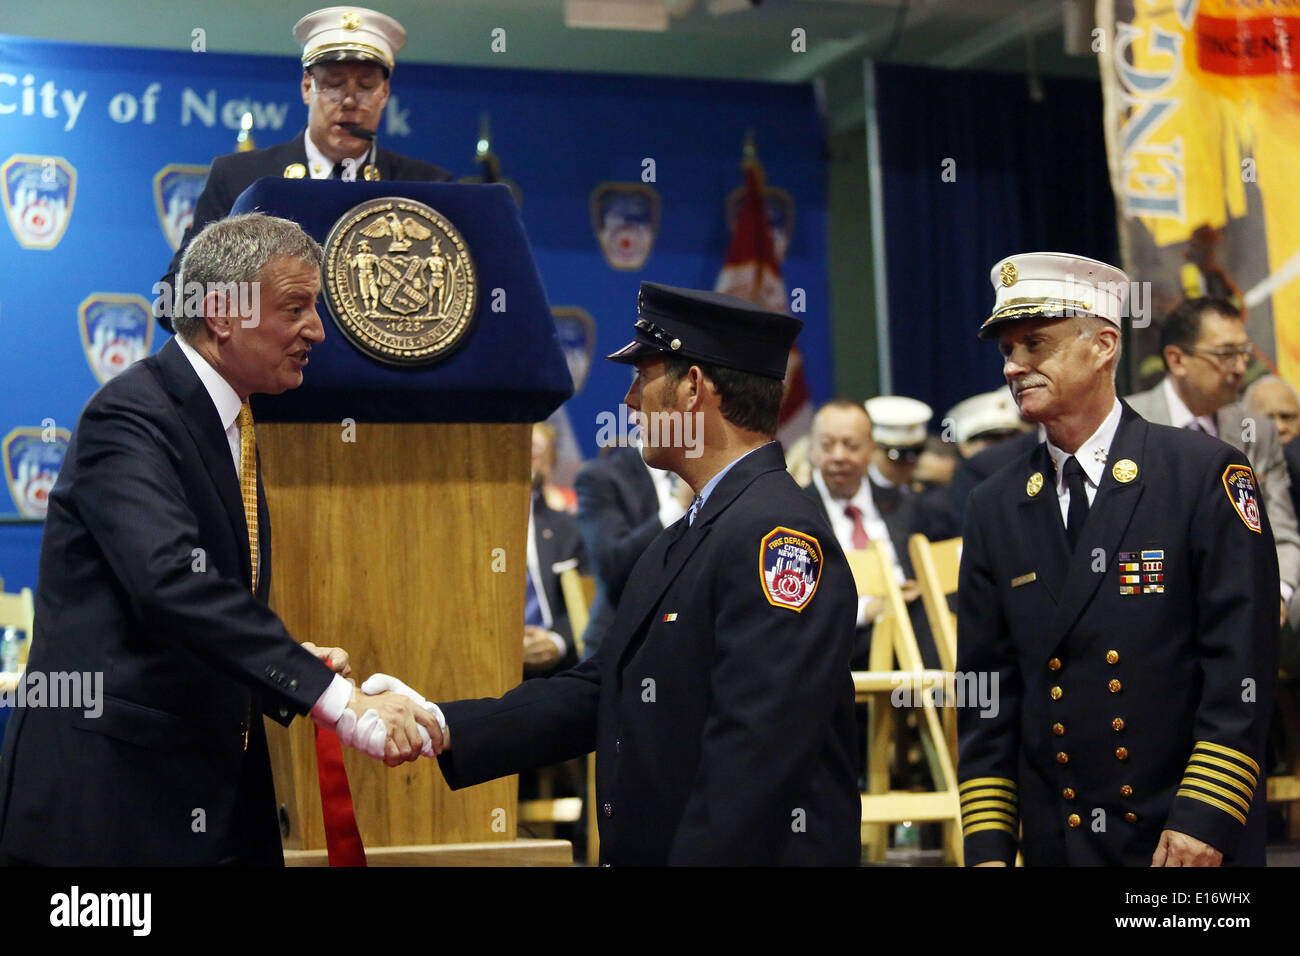 New York, New York, USA. 4th June, 2014. NYC Mayor BILL DE BLASIO, left, awards Firefighter EUGENE SQUIRES of Ladder Company 13 the Thomas A. Kenny Memorial Medal during the FDNY Medal Day 2014 at the 69th Regiment Armory in New York City, New York. © Krista Kennell/ZUMAPRESS.com/Alamy Live News Stock Photo